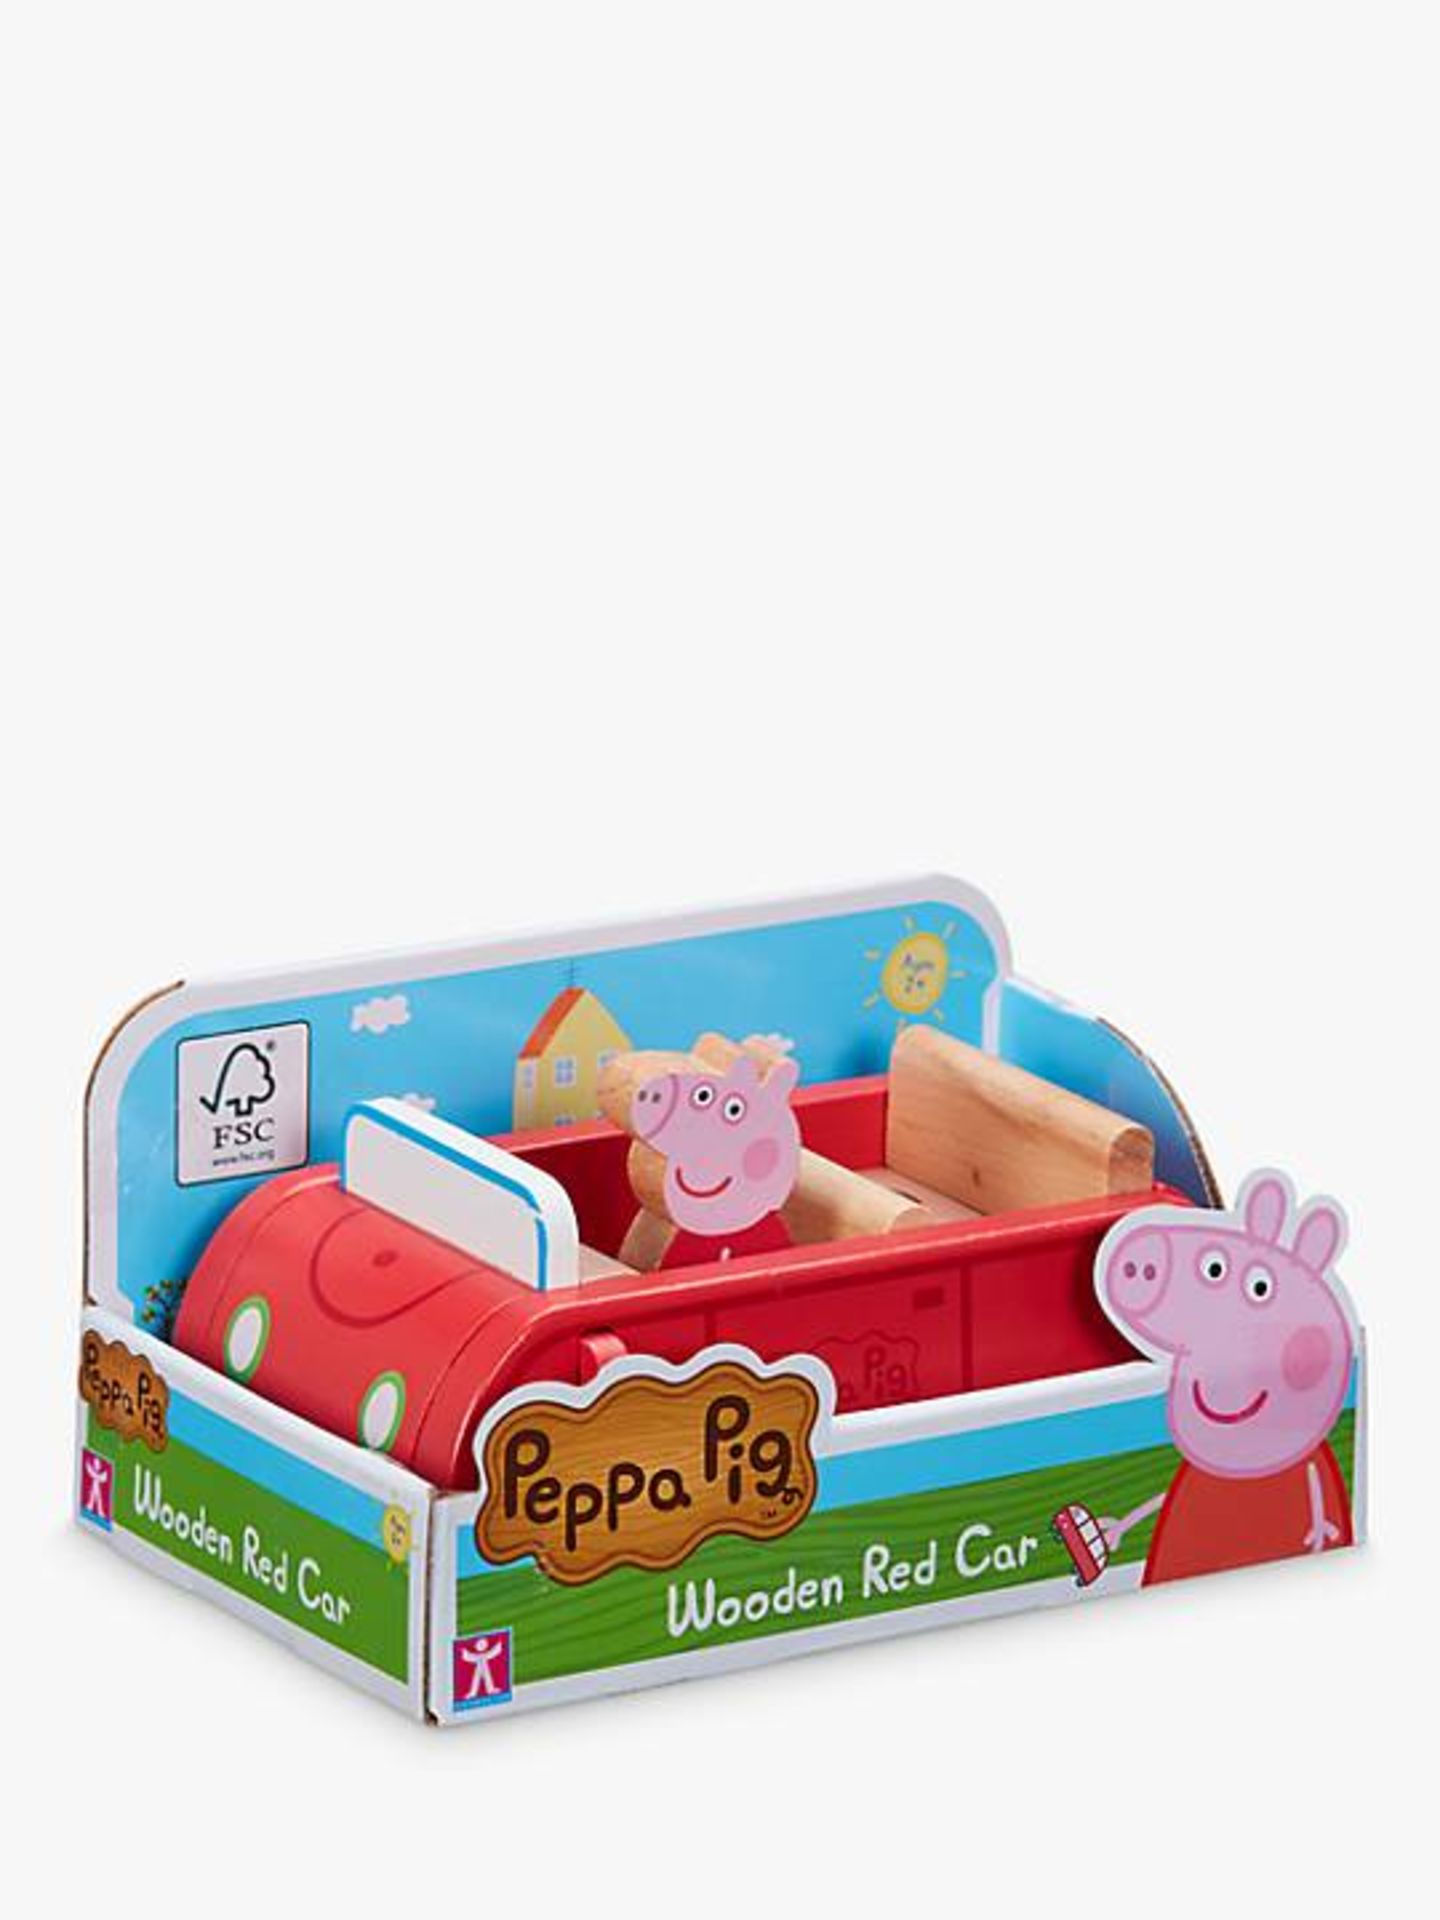 Pallet of Raw Customer Returns - Category - TOYS - P100141537 - Image 52 of 60